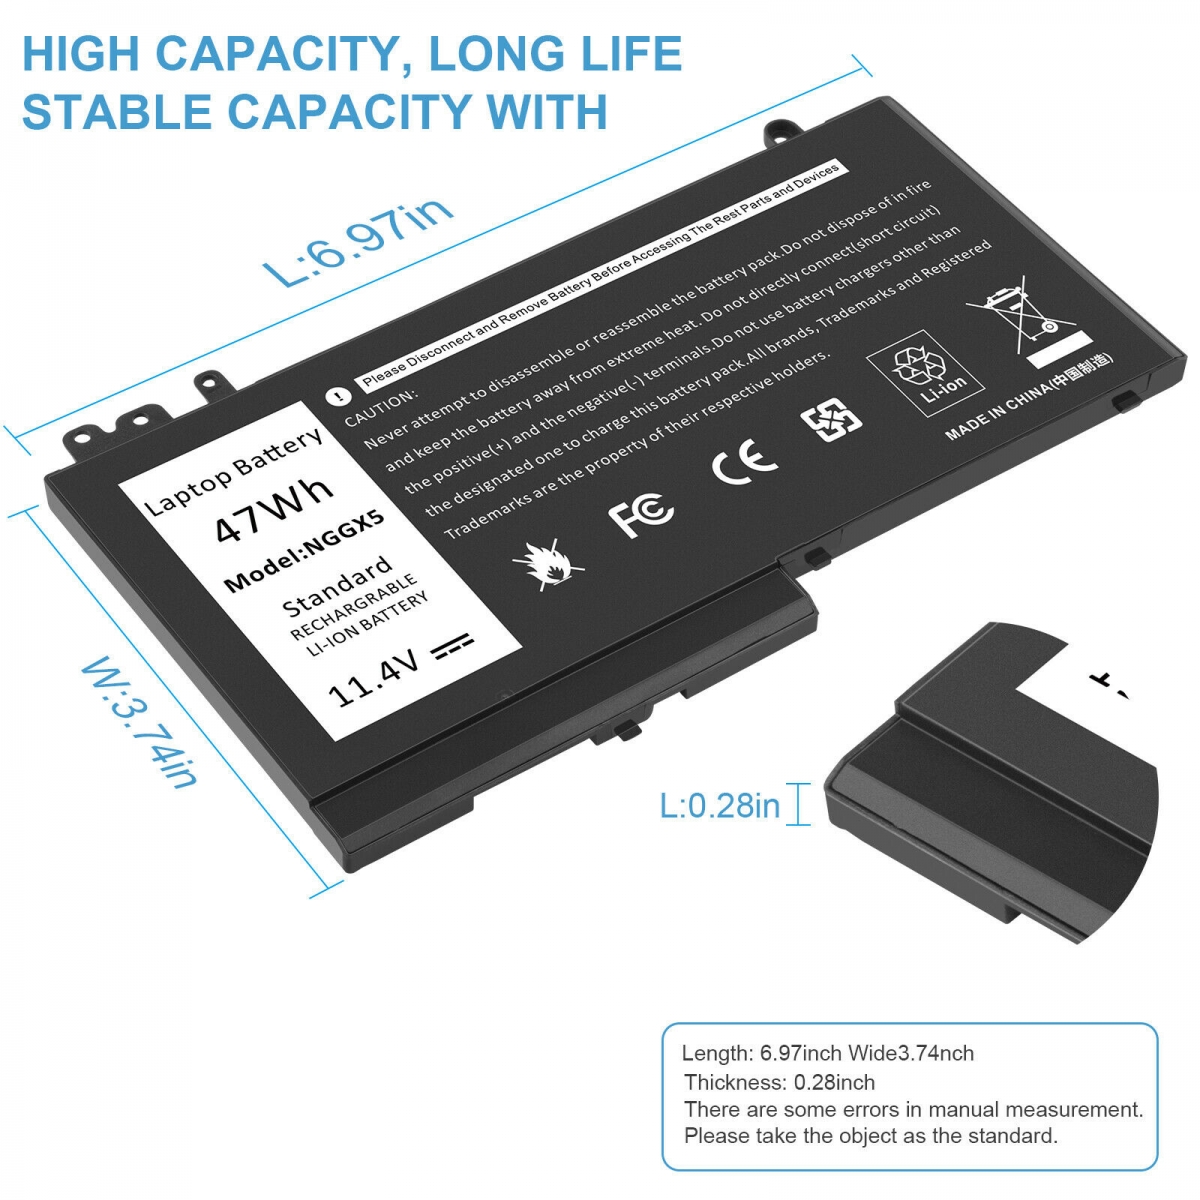 NGGX5 Battery-CPY,Laptop battery, Laptop adapter, Laptop charger, Dell battery, Apple battery, HP battery